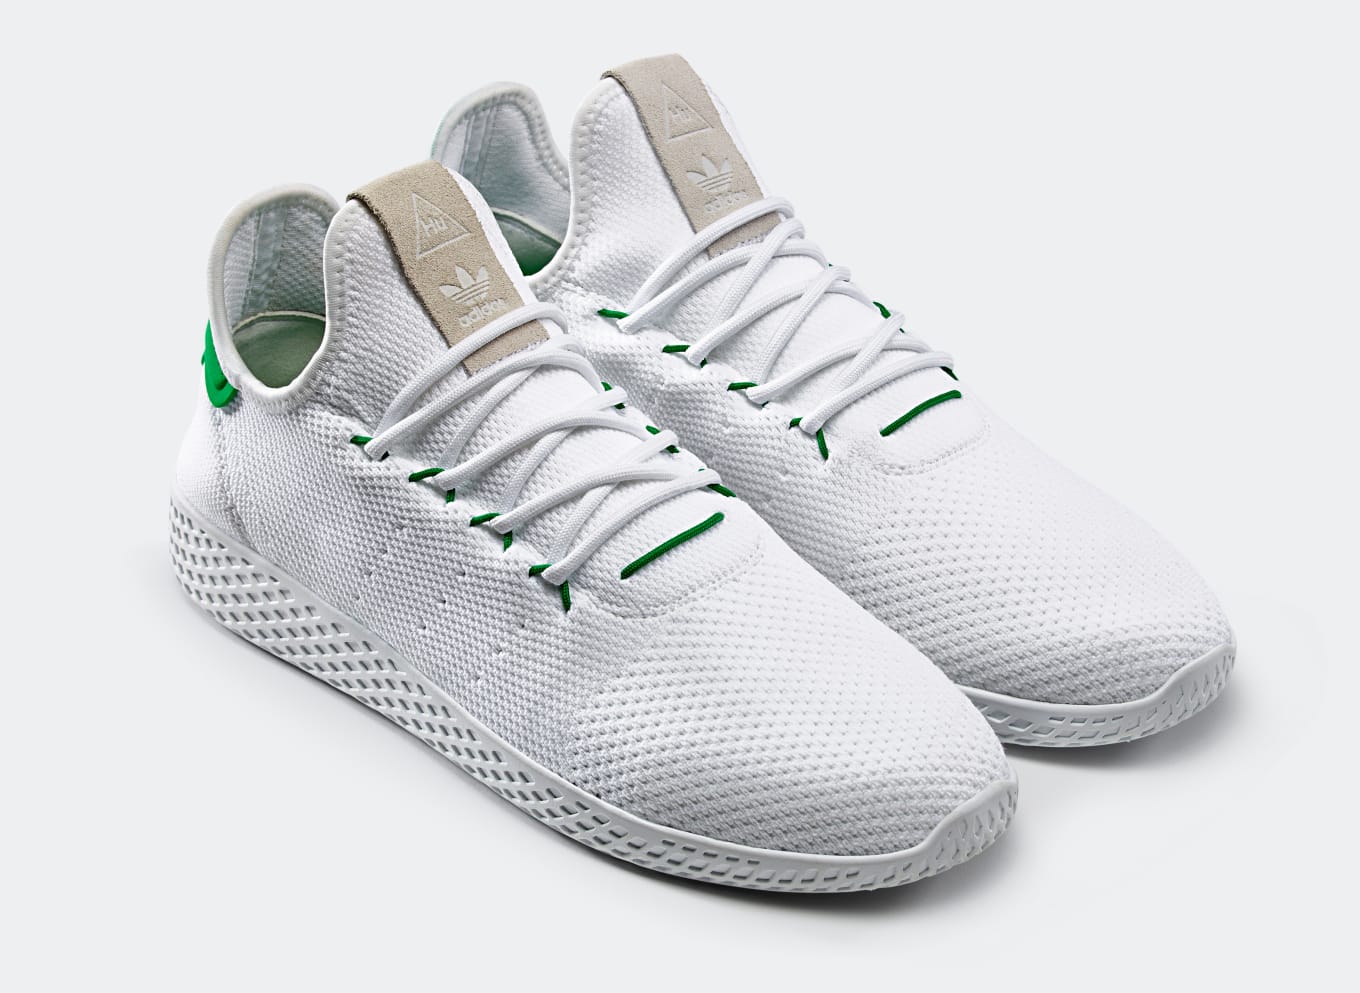 Ant shield Adept Pharrell Adidas Tennis Hu Release Date | Sole Collector